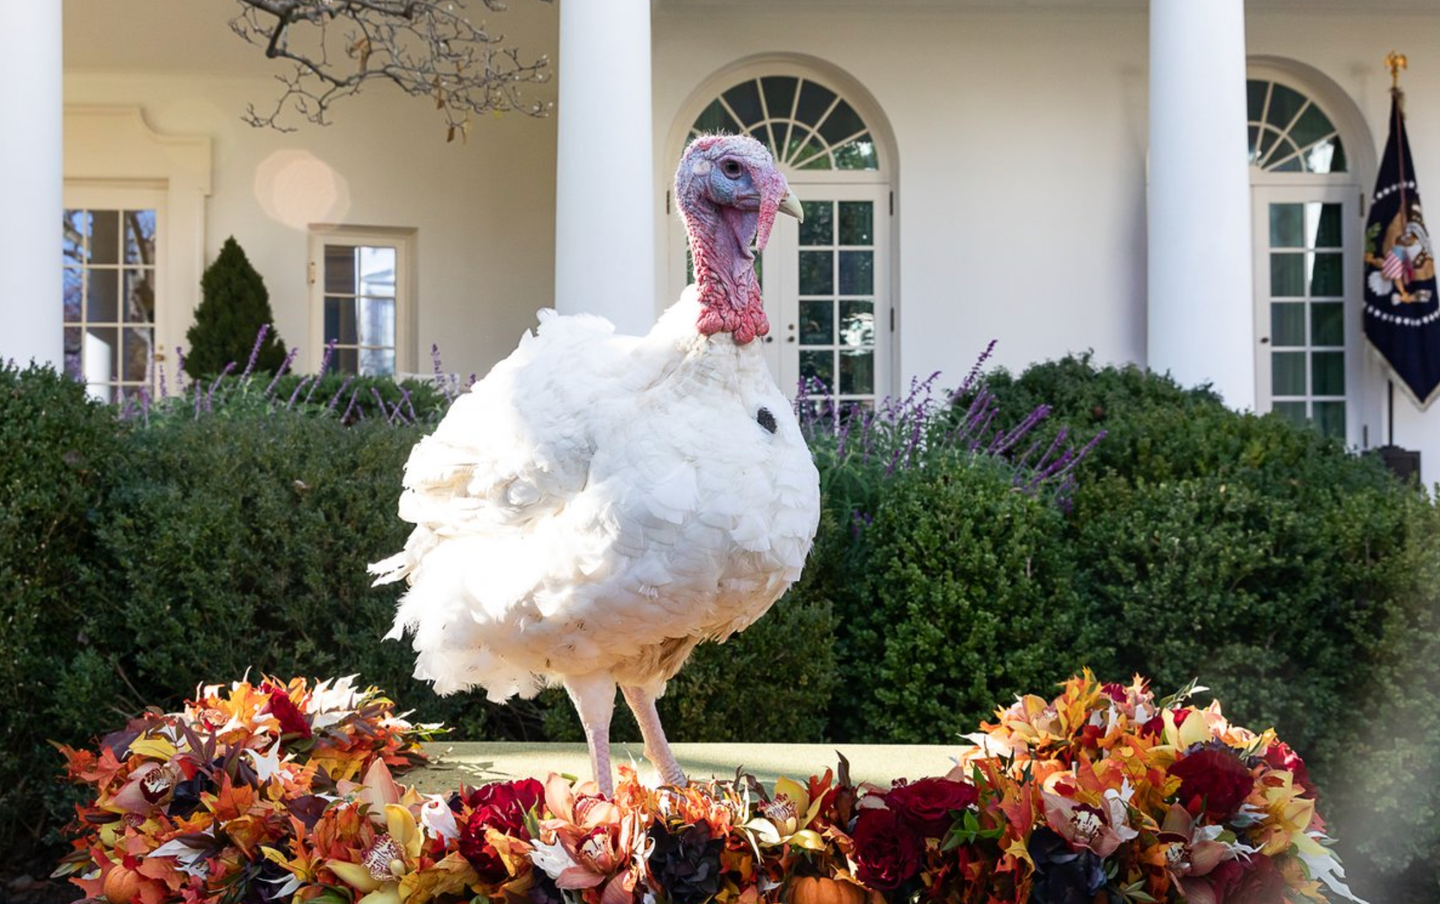 Here is why the president pardons turkeys every year